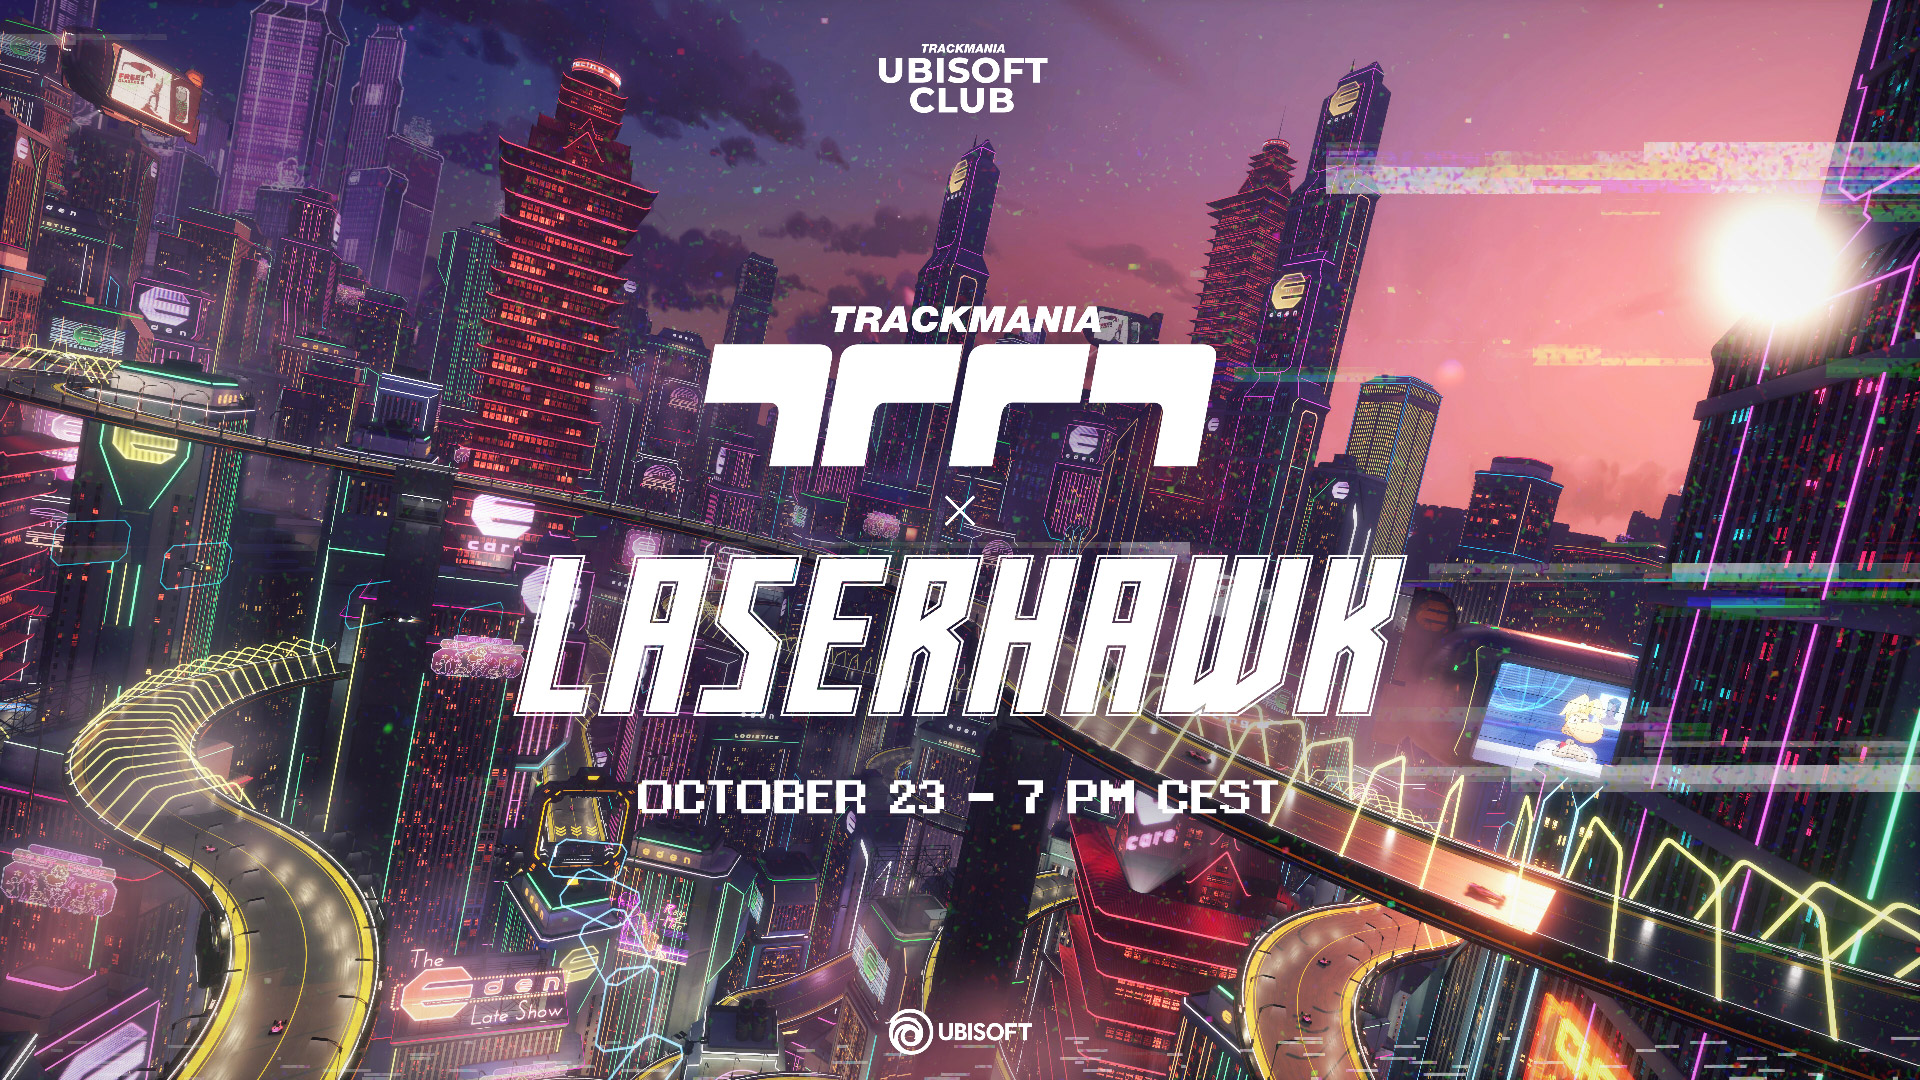 LASERHAWK JOINS THE UBISOFT CLUB IN TRACKMANIA!